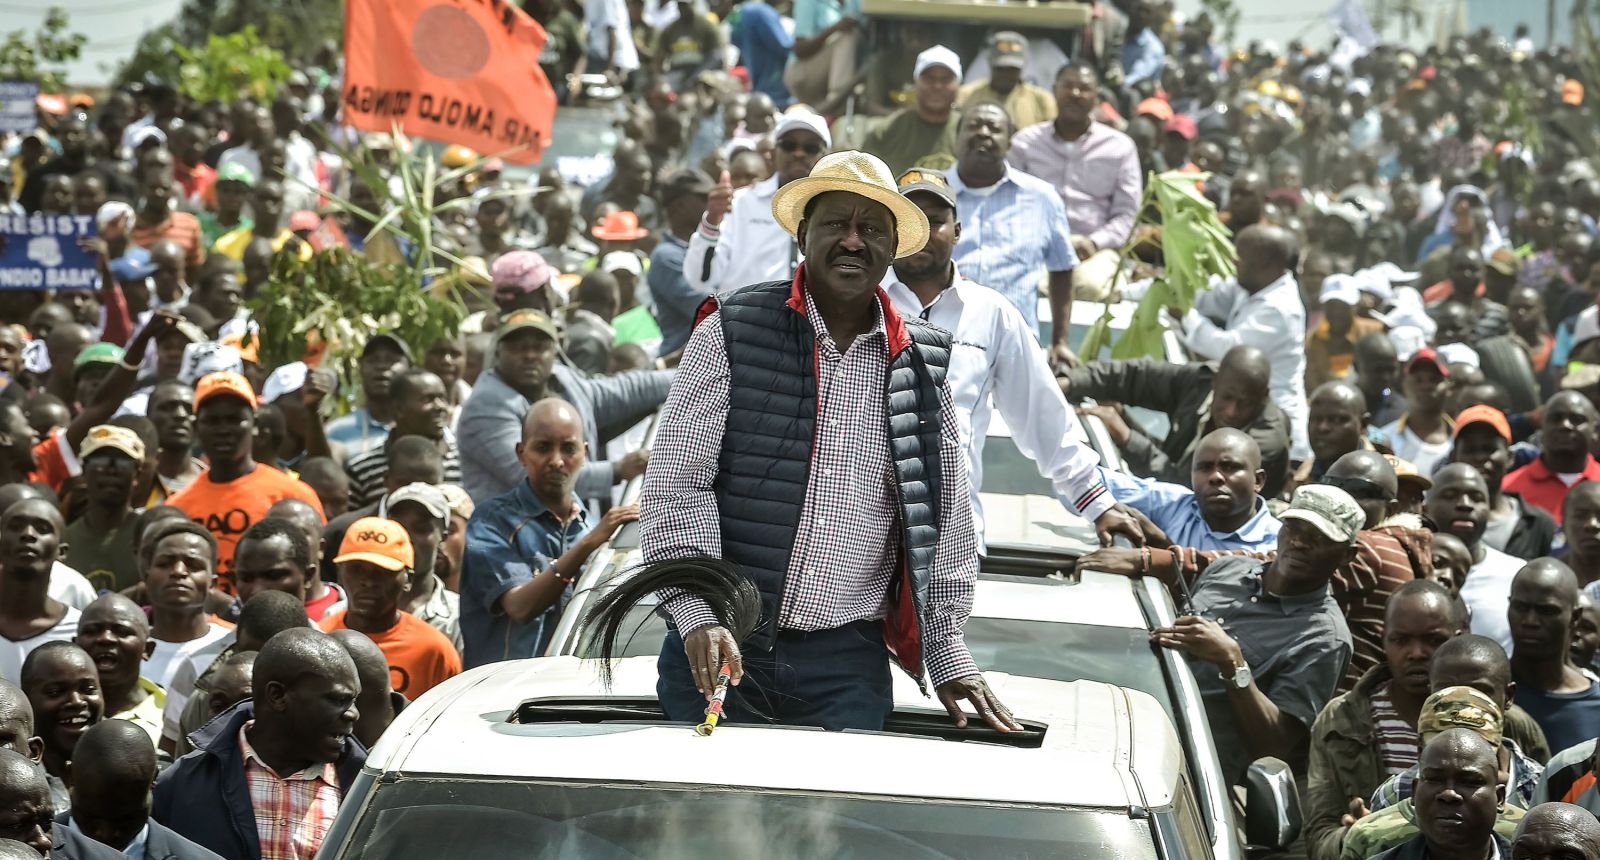 Kenyan opposition leader Raila Odinga pictured during the 2022 election, which he disputes the result of.